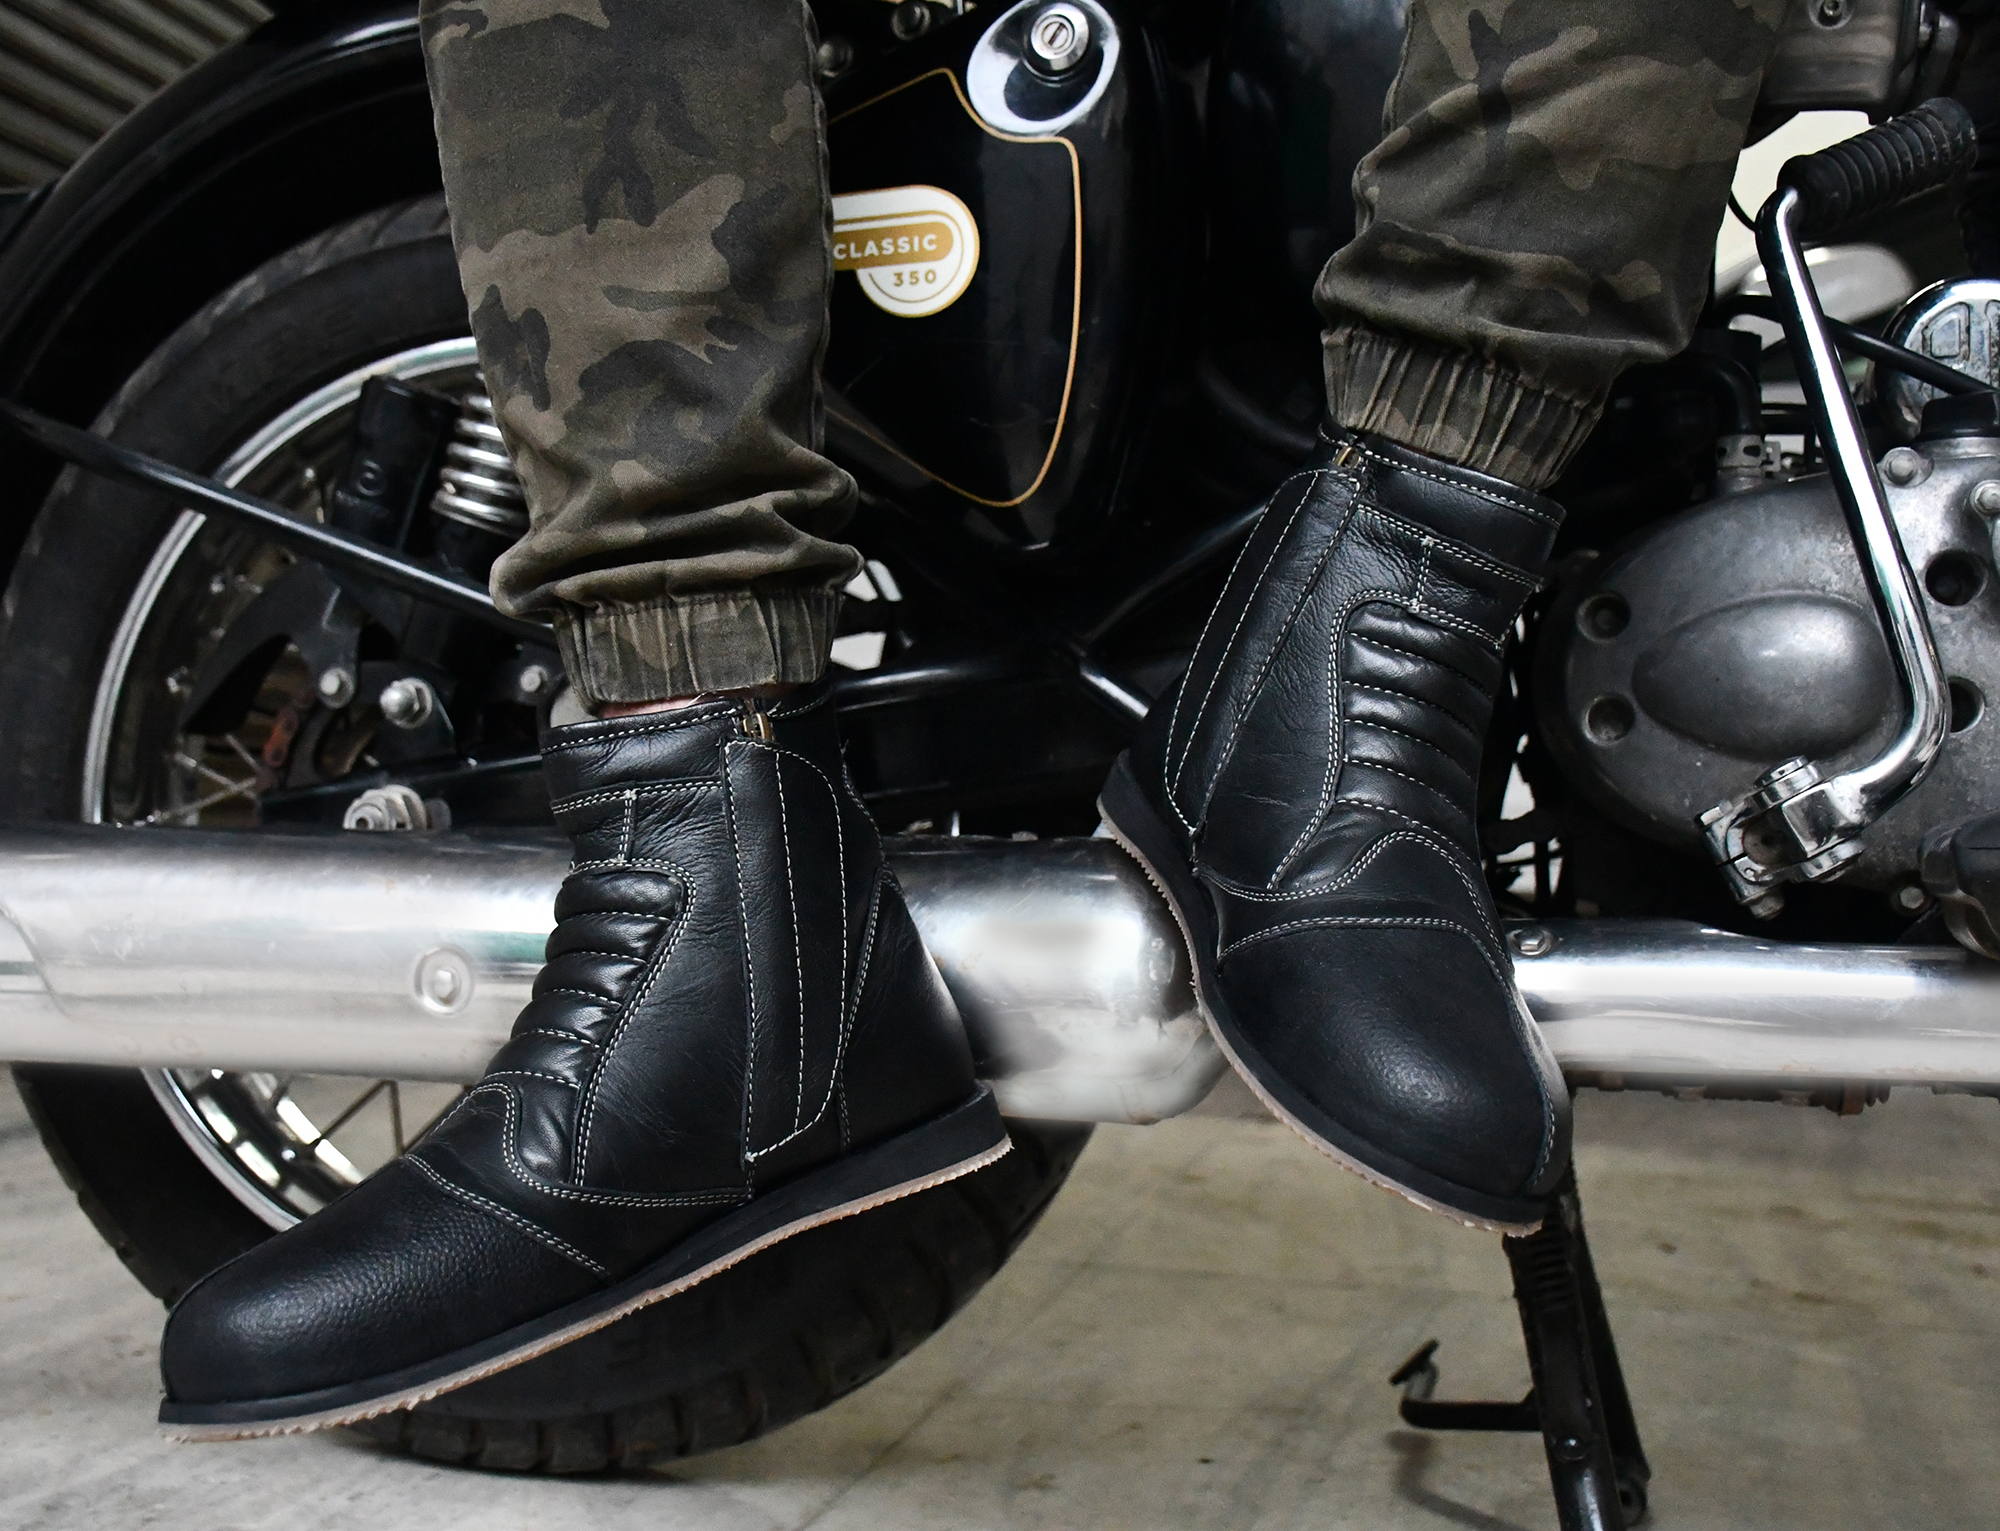 Biker Boots : Urban leather Boots with side chain for Bikers with heavy duty Rubber Sole by ASM. Article : Biker709-Black